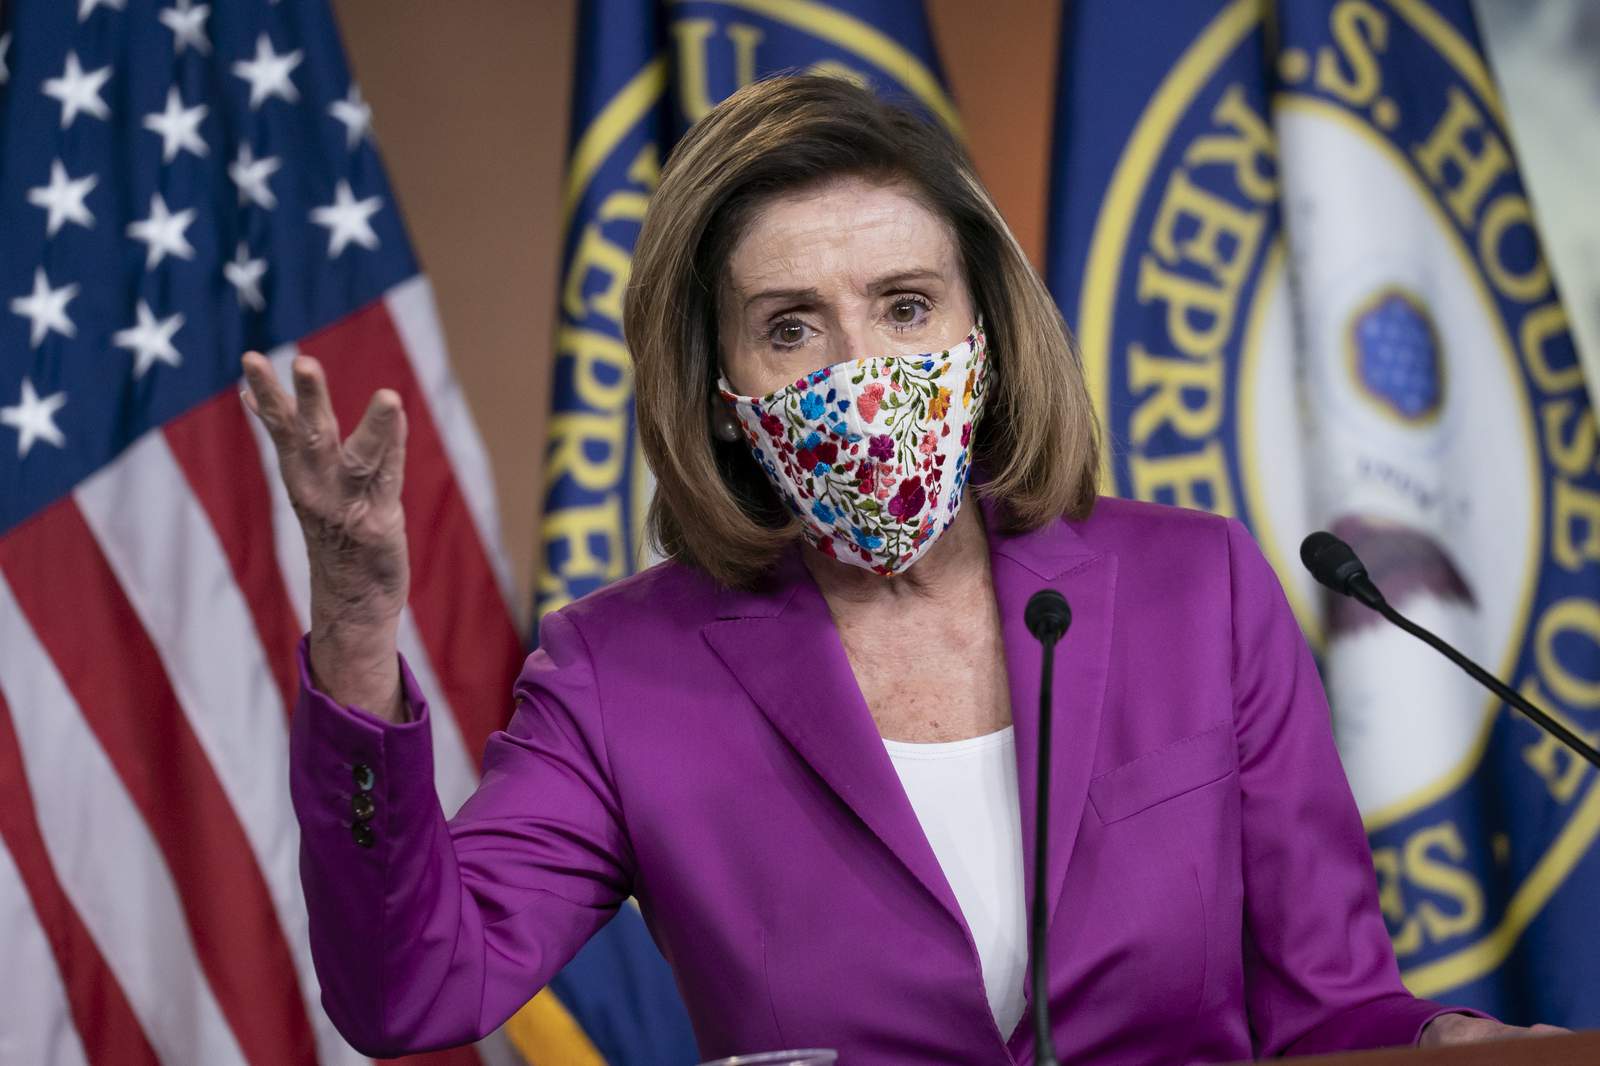 Dems' momentum builds to impeach Trump, Pelosi hits rioters